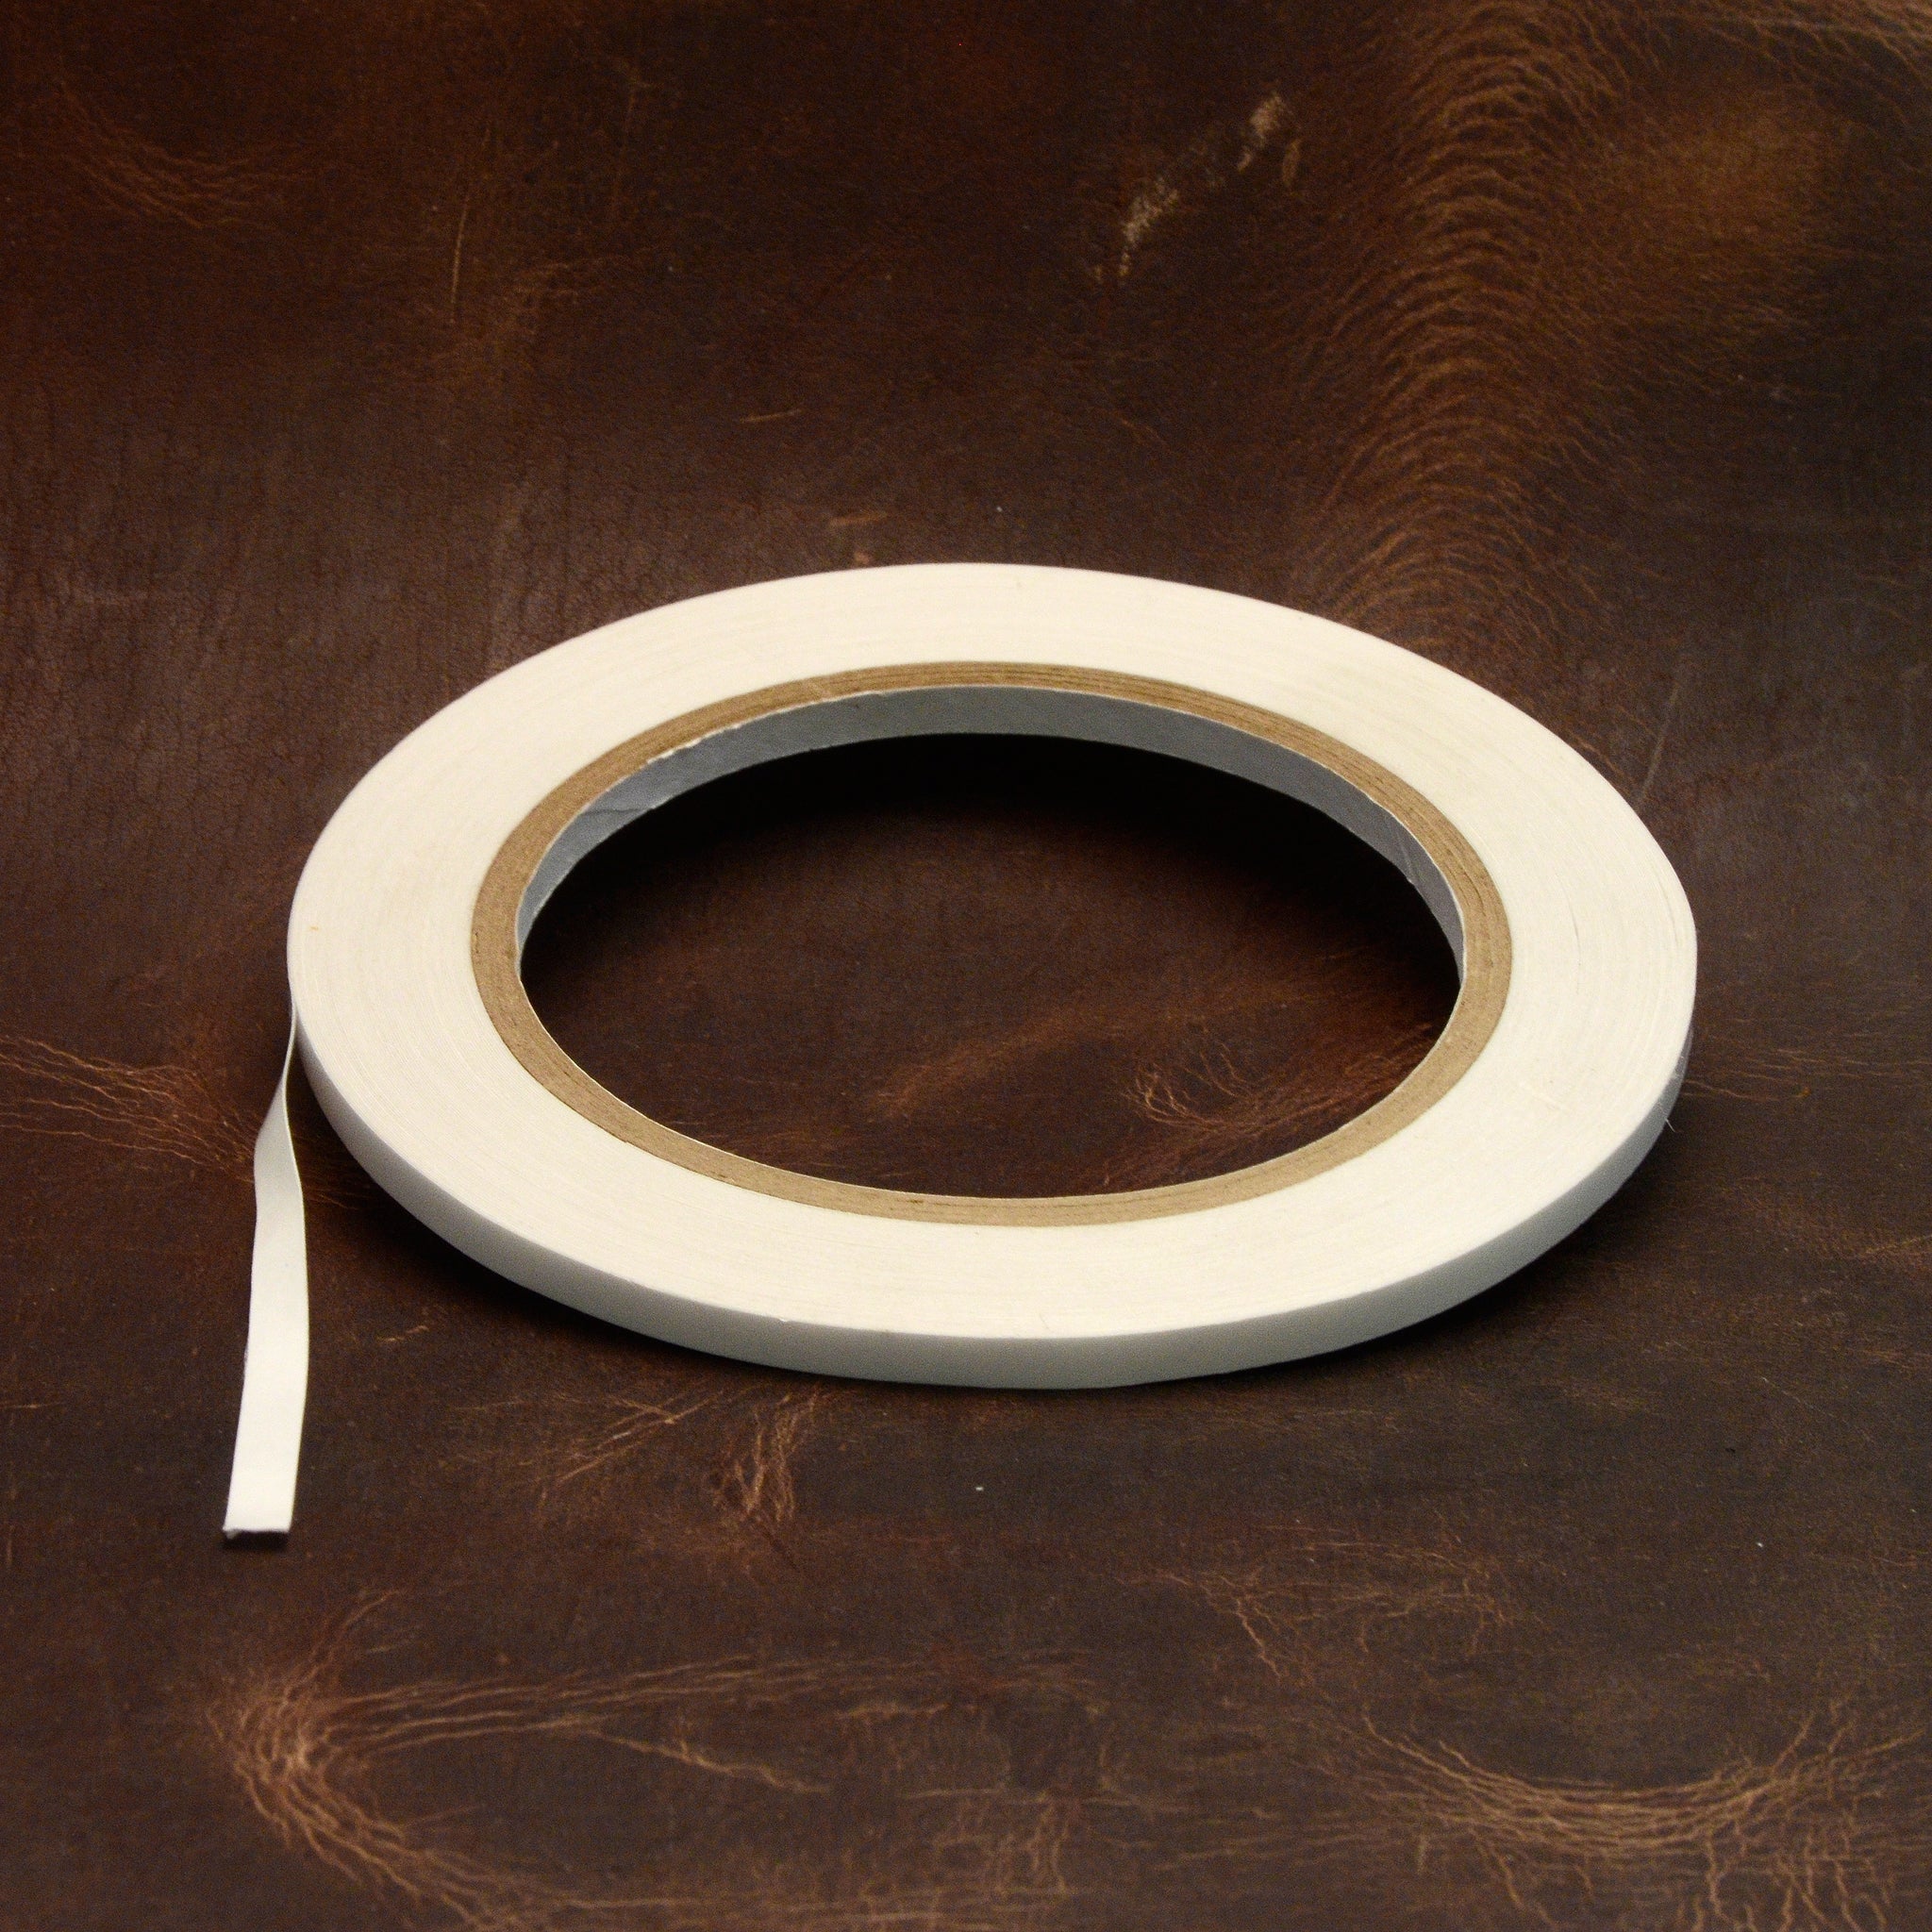 Permanent double sided thin tape ideal for leathercraft to hold while stitching